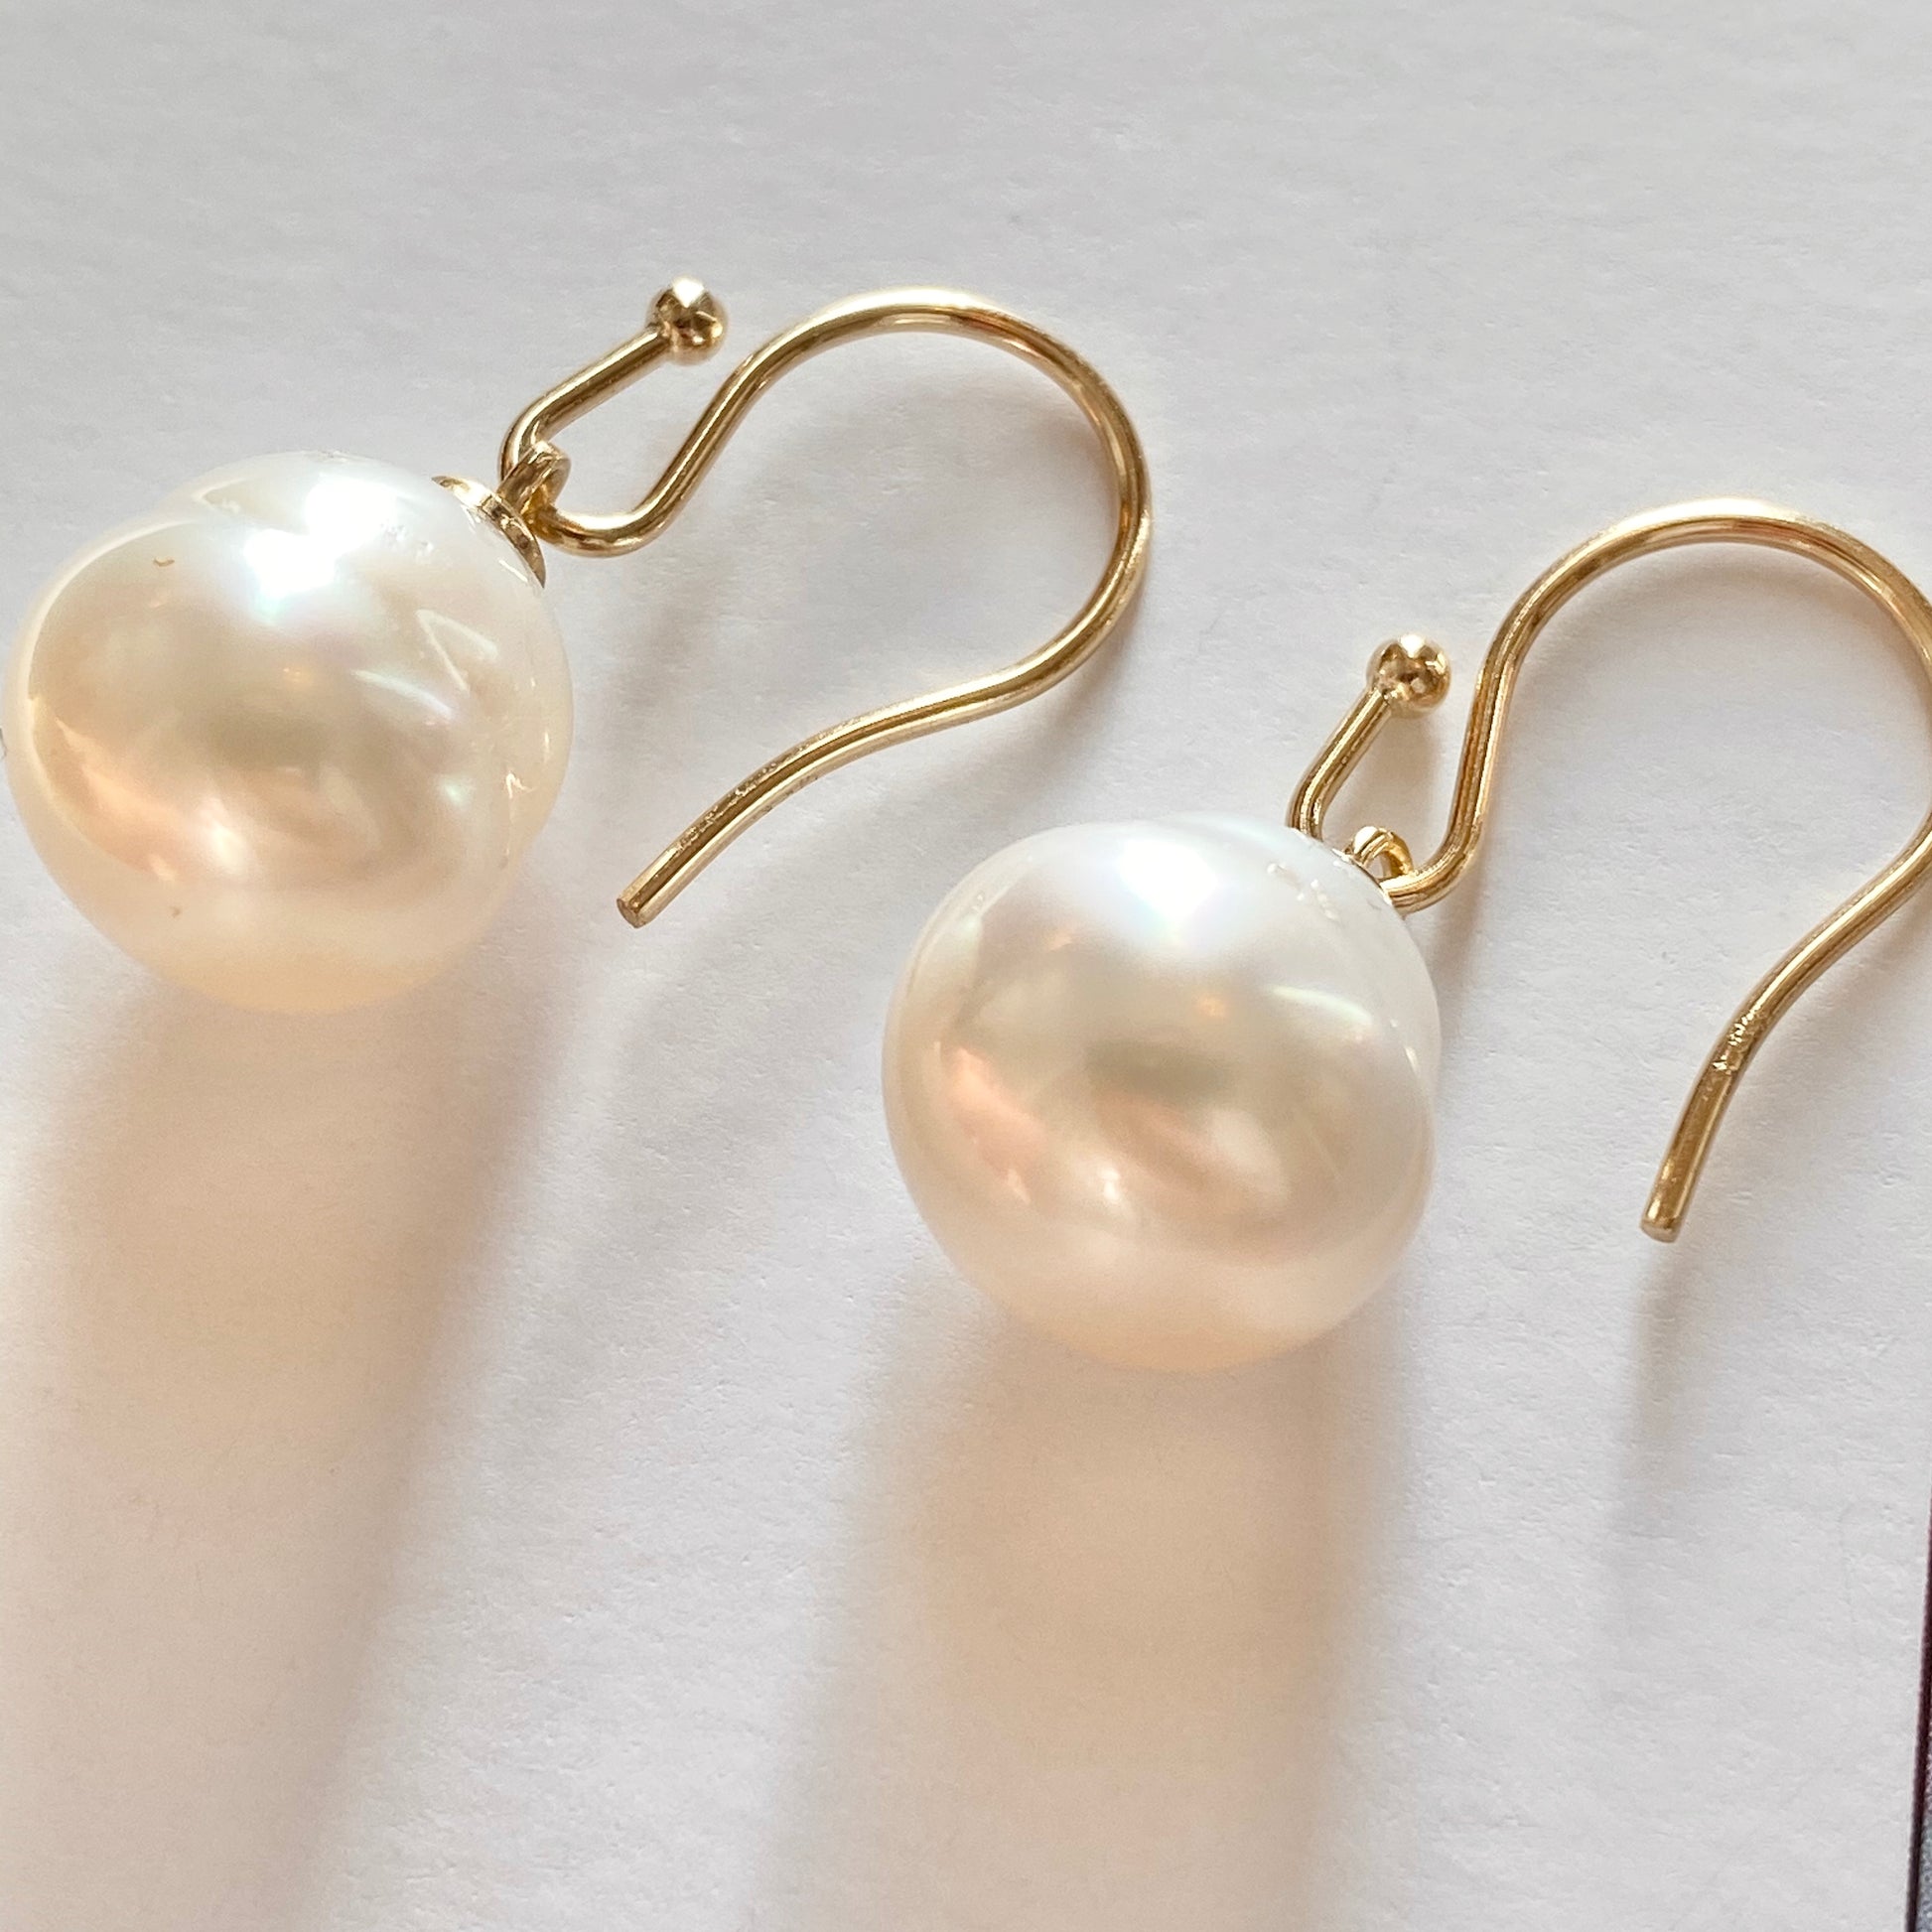 14KT Yellow Gold Paspaley Pearl Bishop Hook Earrings #2/ 12mm, 14KT Yellow Gold Paspaley Pearl Bishop Hook Earrings #2/ 12mm - Legacy Saint Jewelry